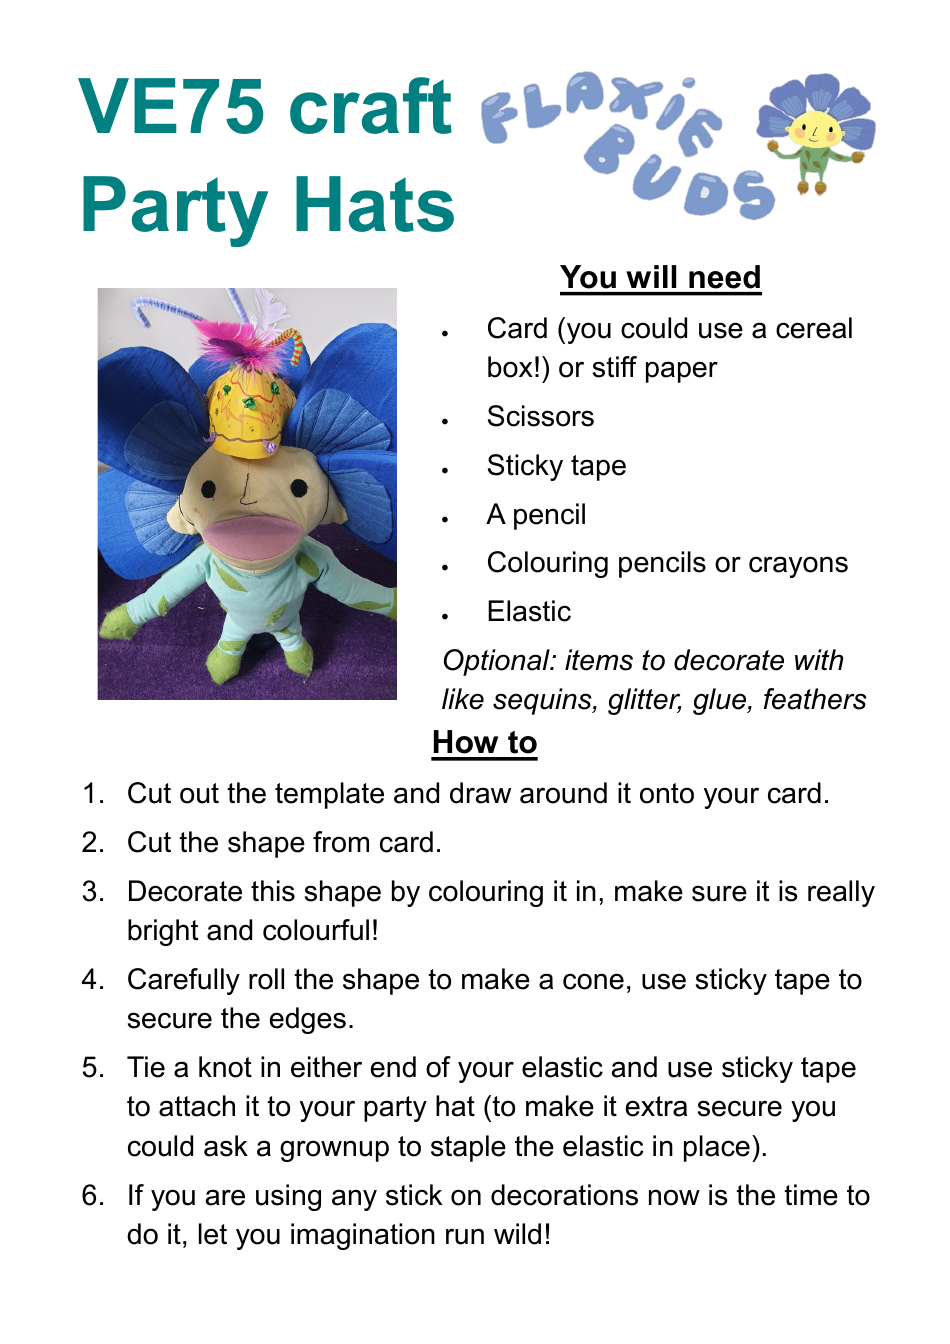 Cardboard Party Hat Template - Free Download